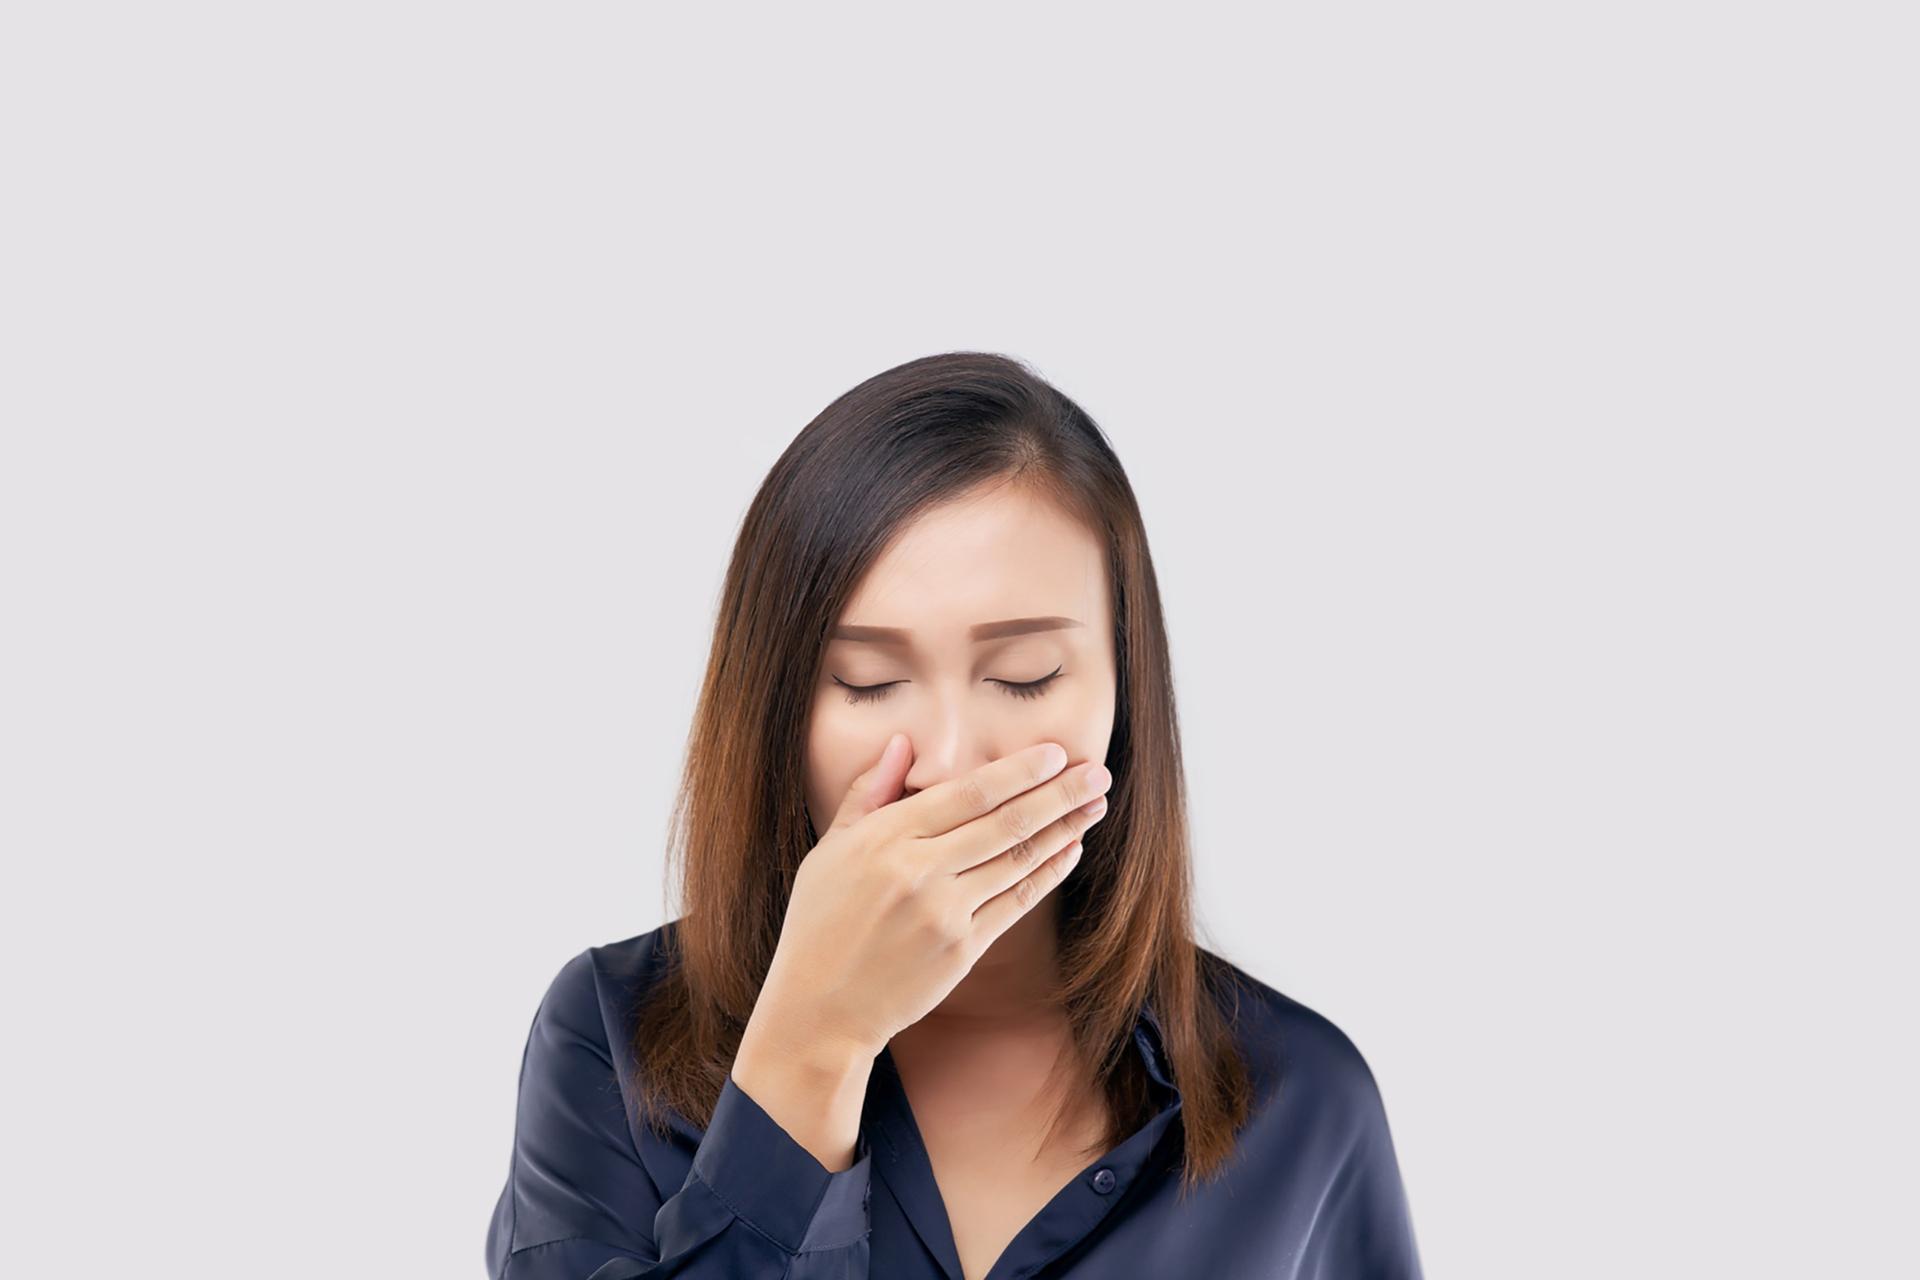 Home Remedies For Burping and Tips to Prevent Burping